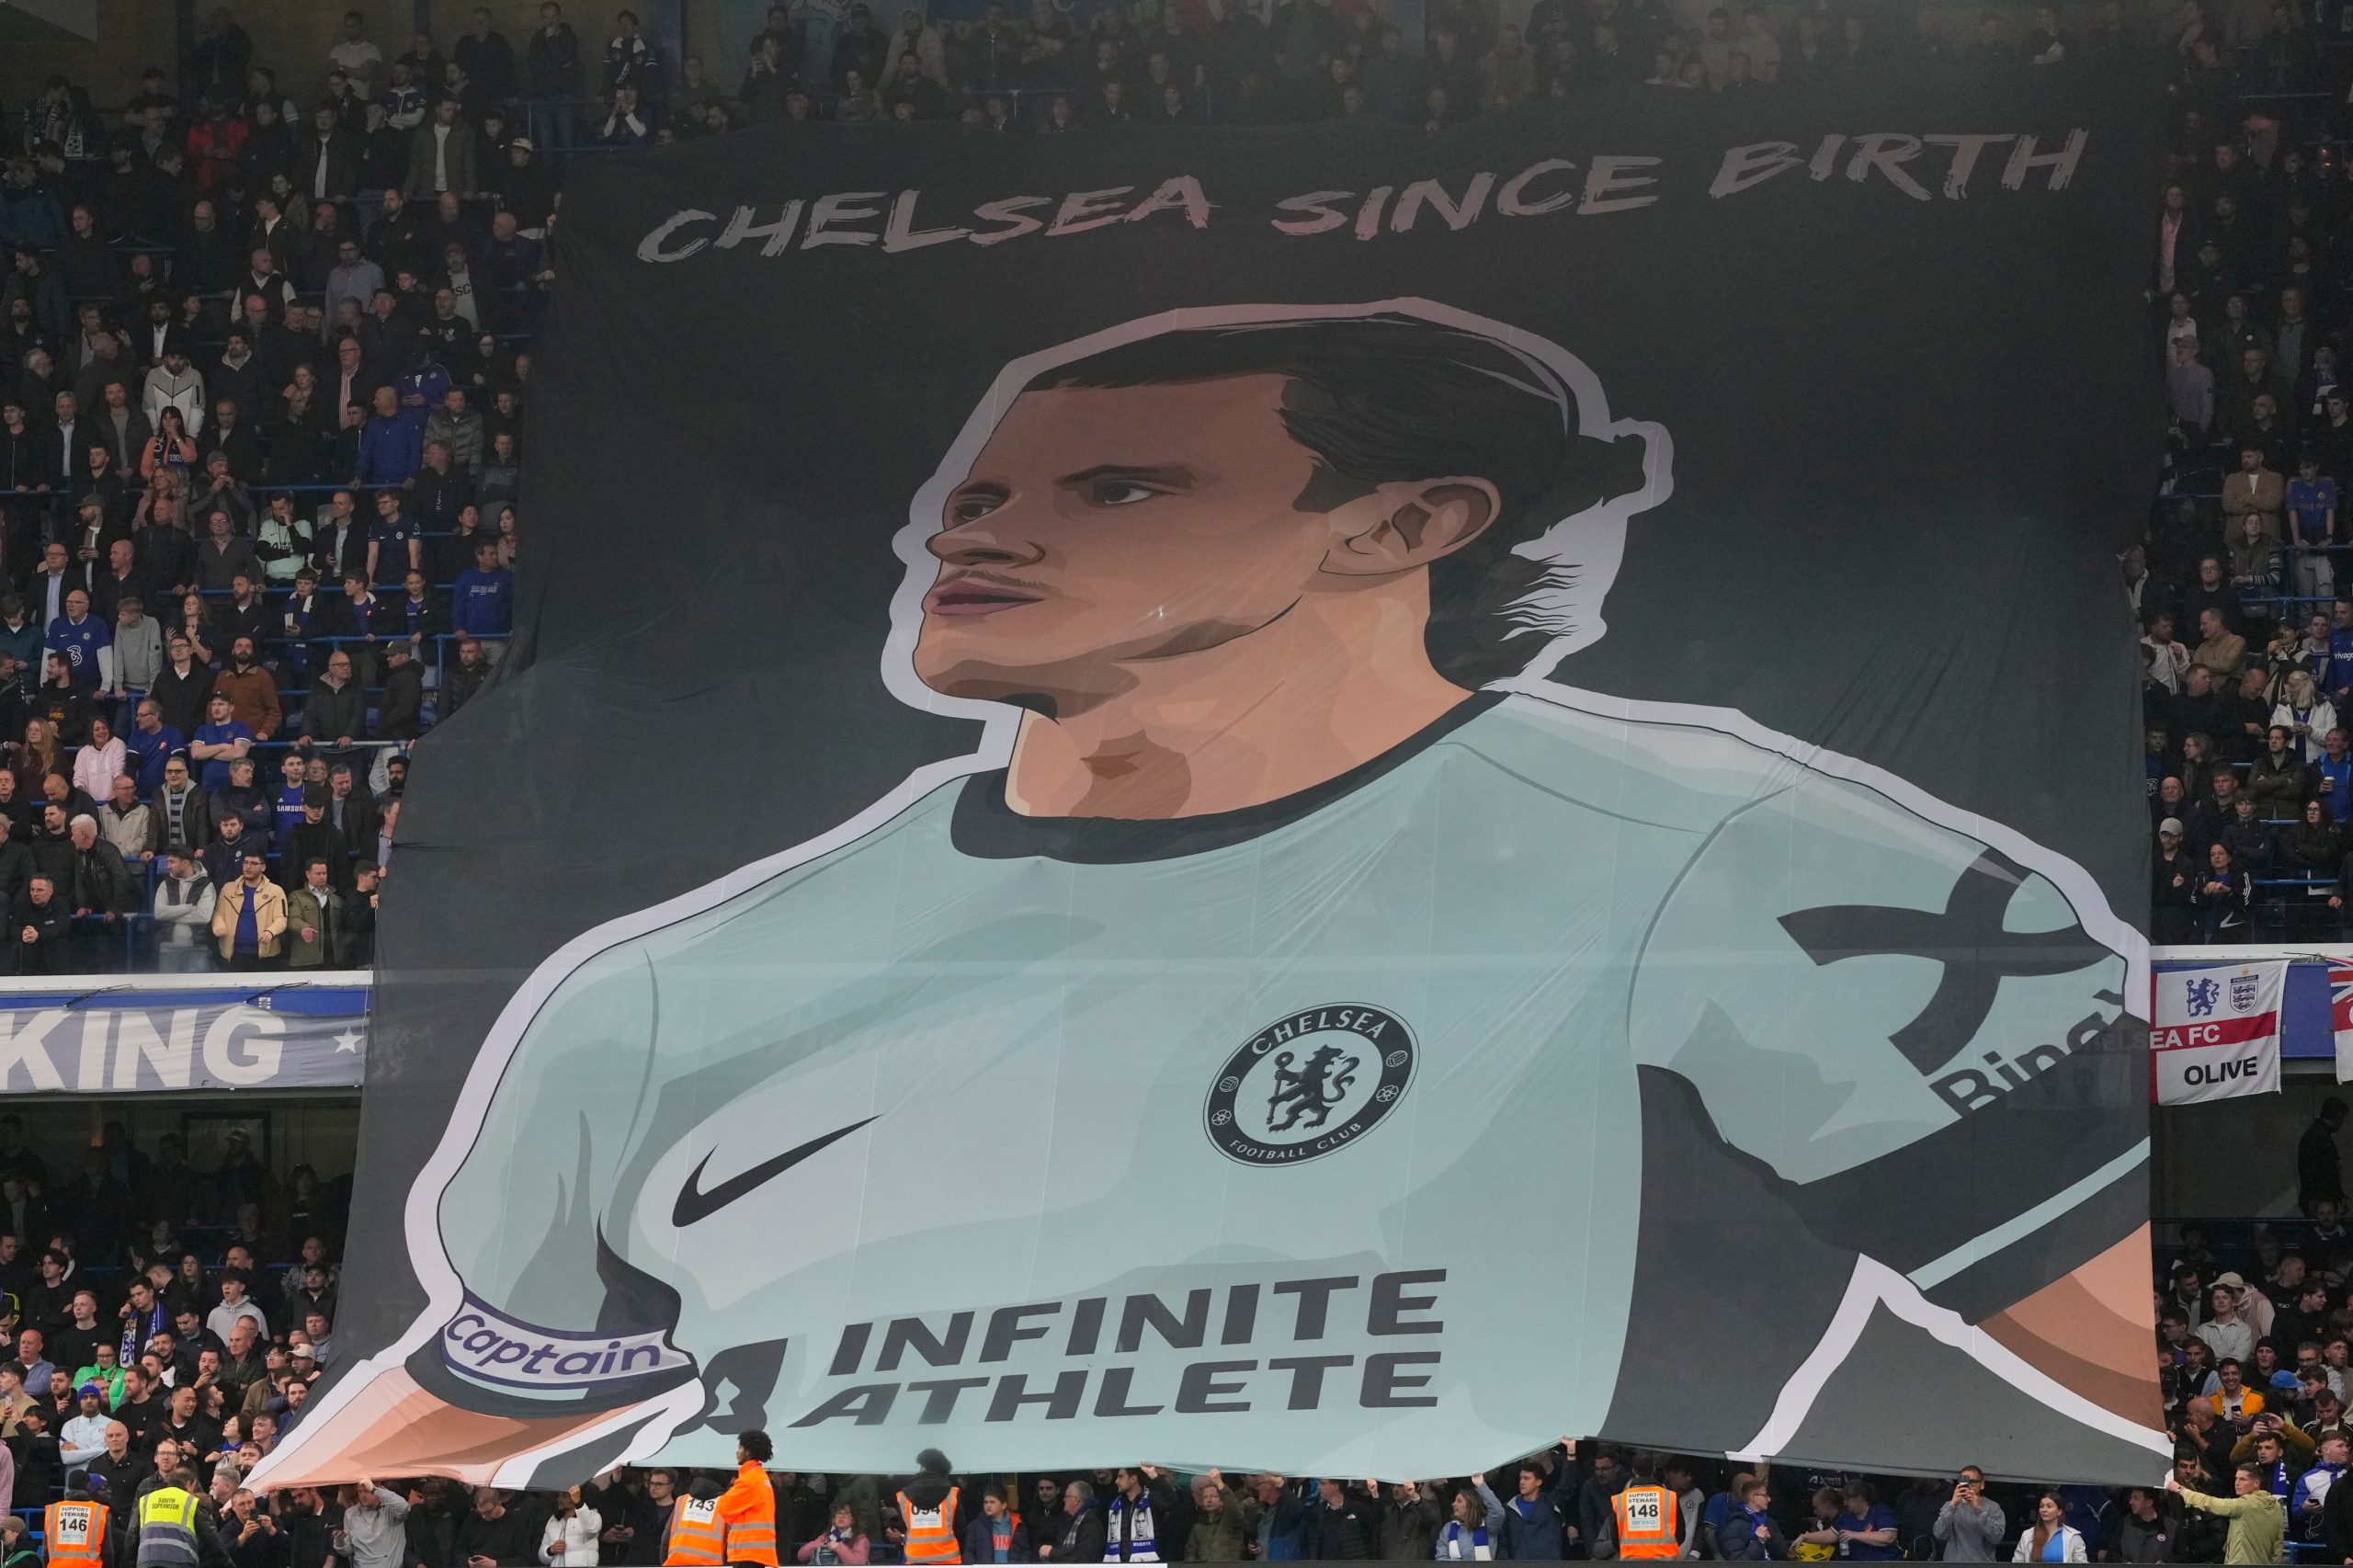 A giant tifo portraying Gallagher with the words “Chelsea since birth” appeared in the crowd before the game against Tottenham